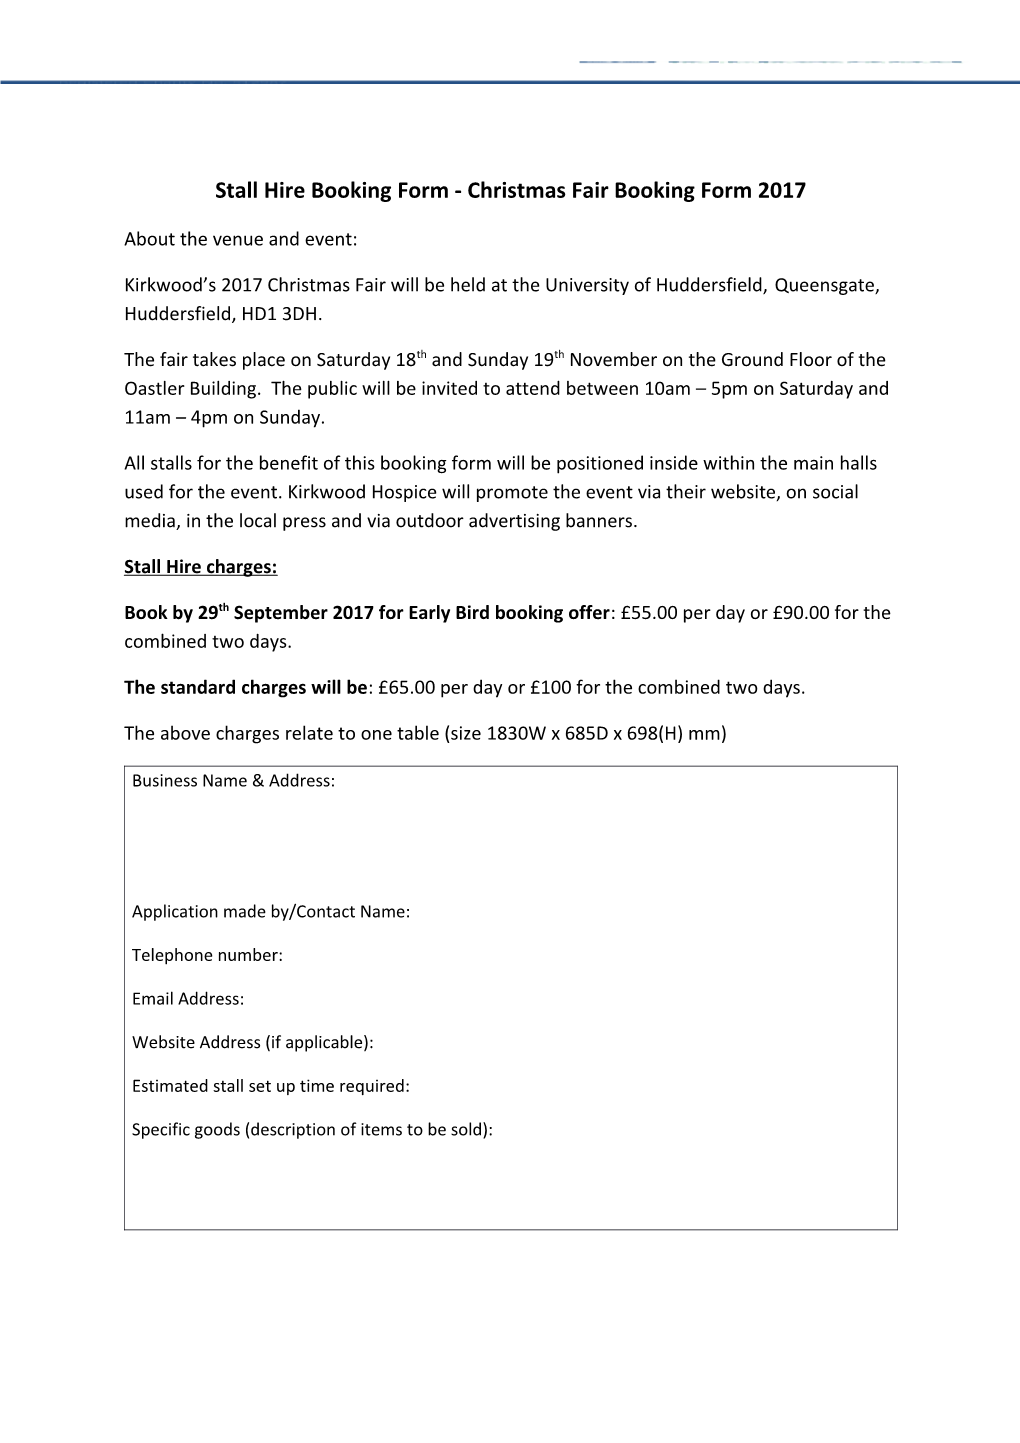 Stall Hire Booking Form - Christmas Fair Booking Form 2017